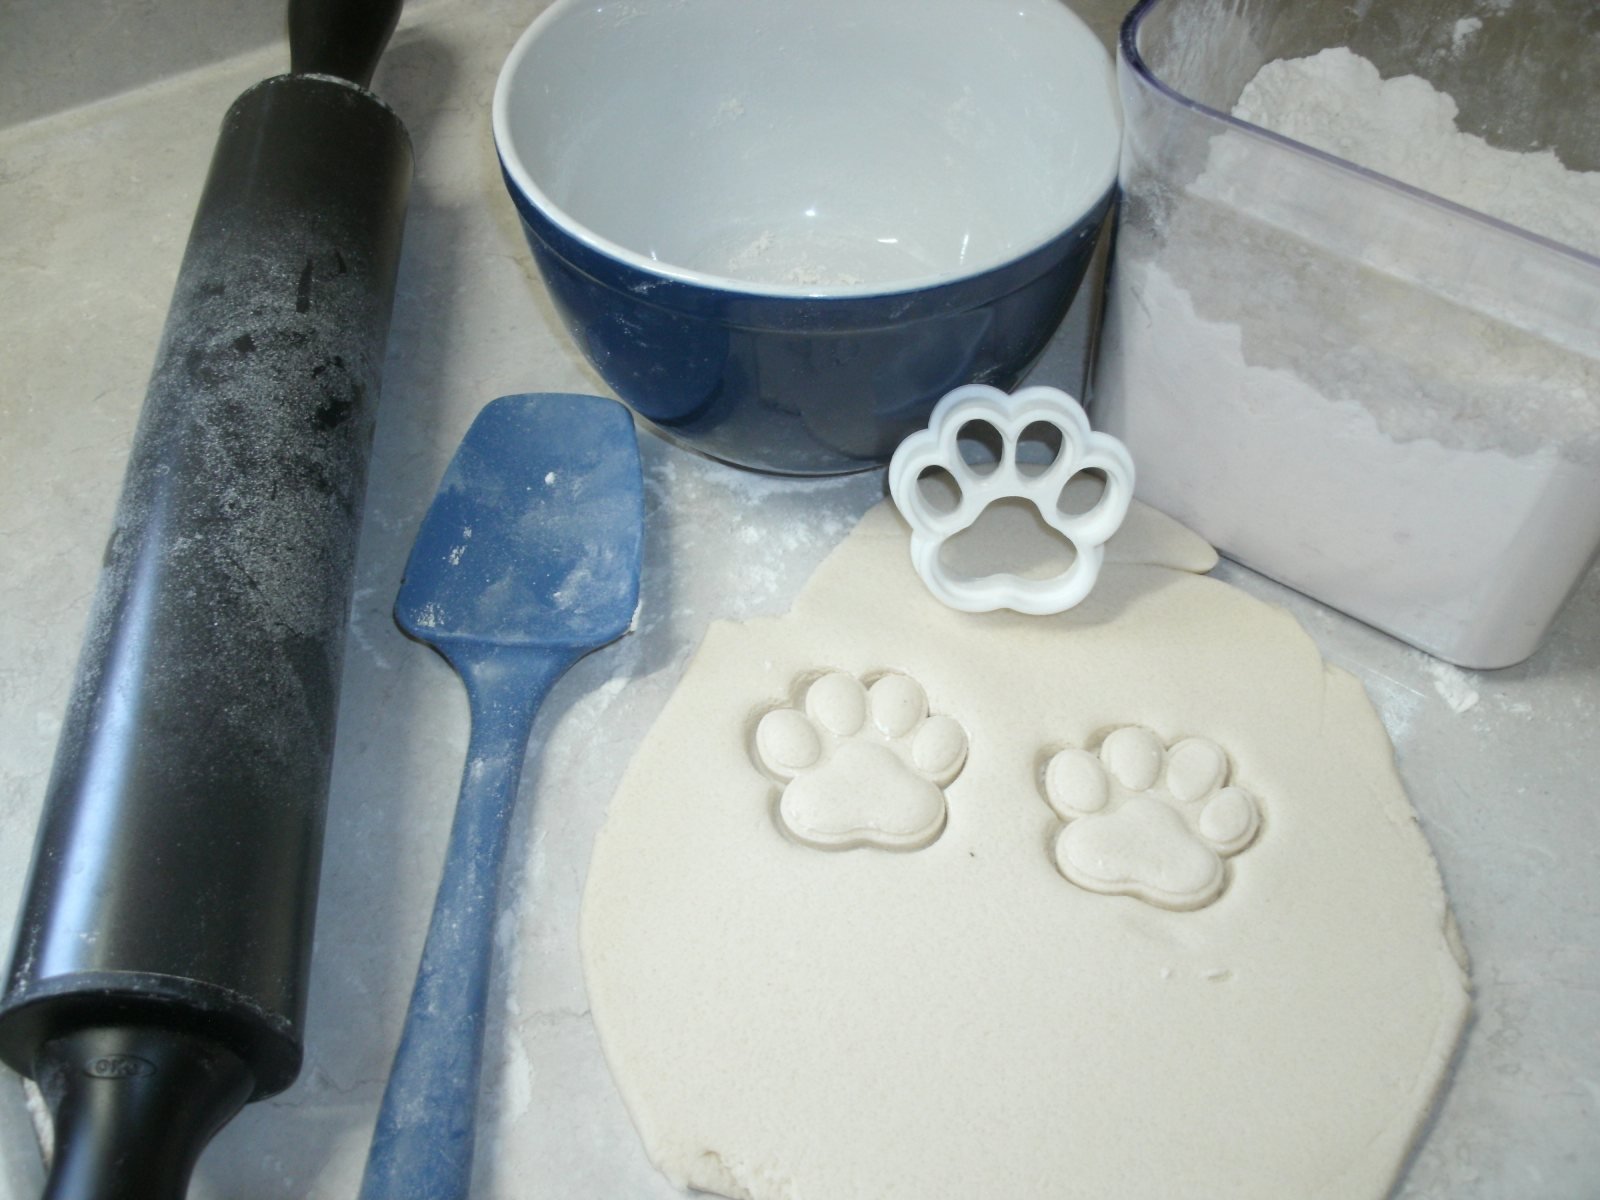 PAW PRINT DOG CAT PET BIRTHDAY SMALL COOKIE CUTTER MADE IN USA PR744